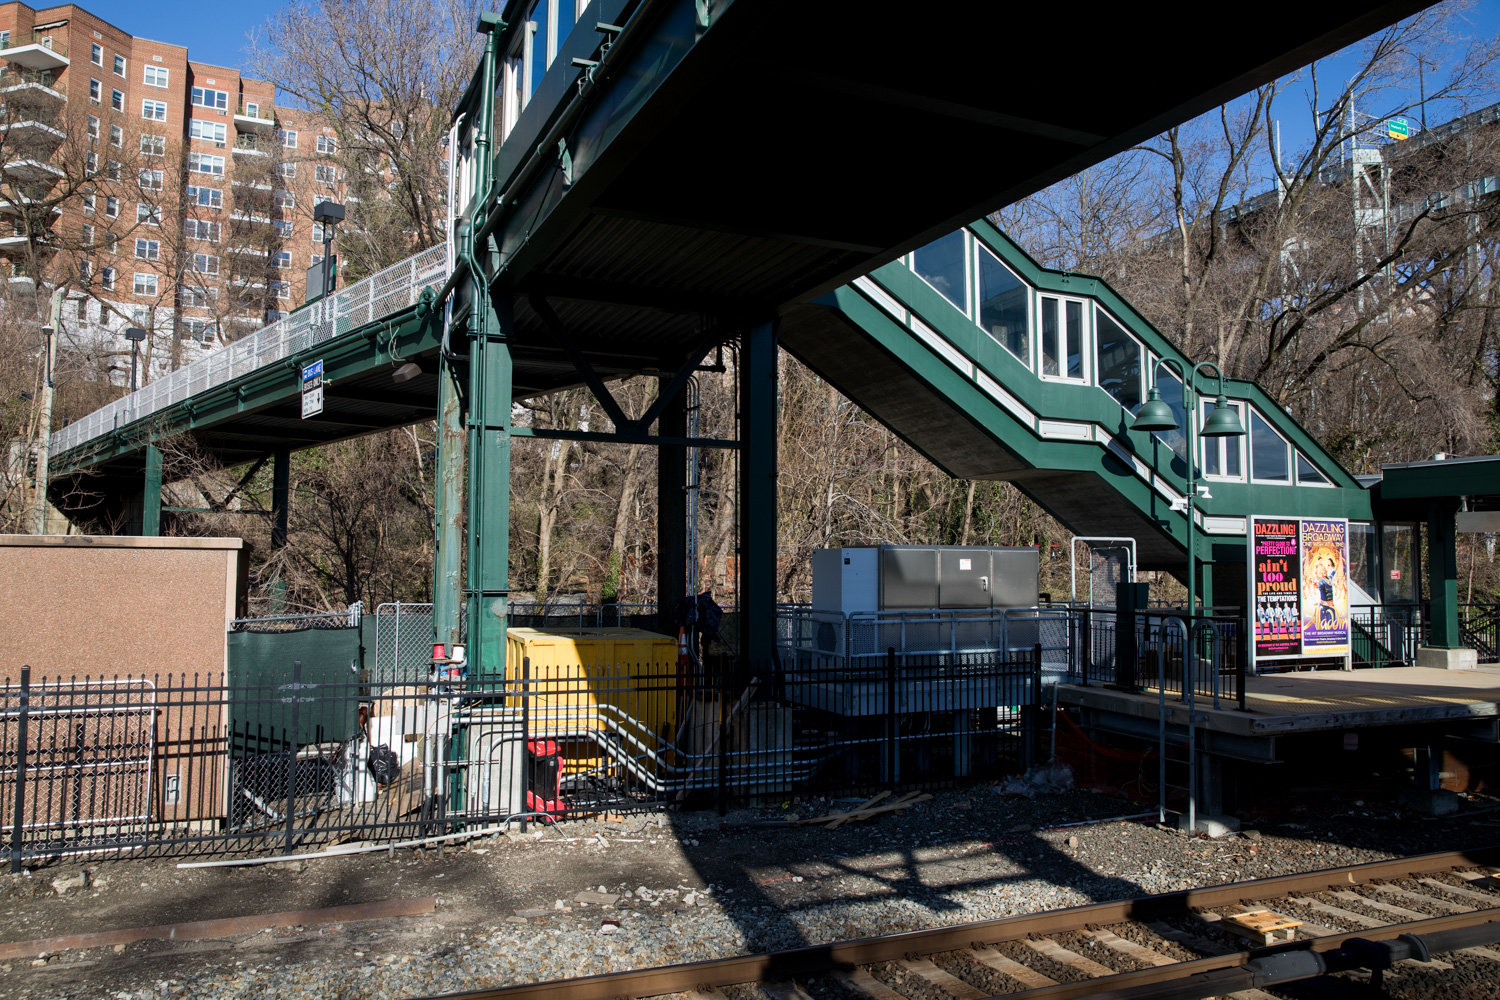 The Spuyten Duyvil Metro-North station is not, like a number of stations, compliant in properly fulfilling the needs of passengers with disabilities. Commuters, especially those with mobility issues, are frustrated with its continued lack of accessibility.